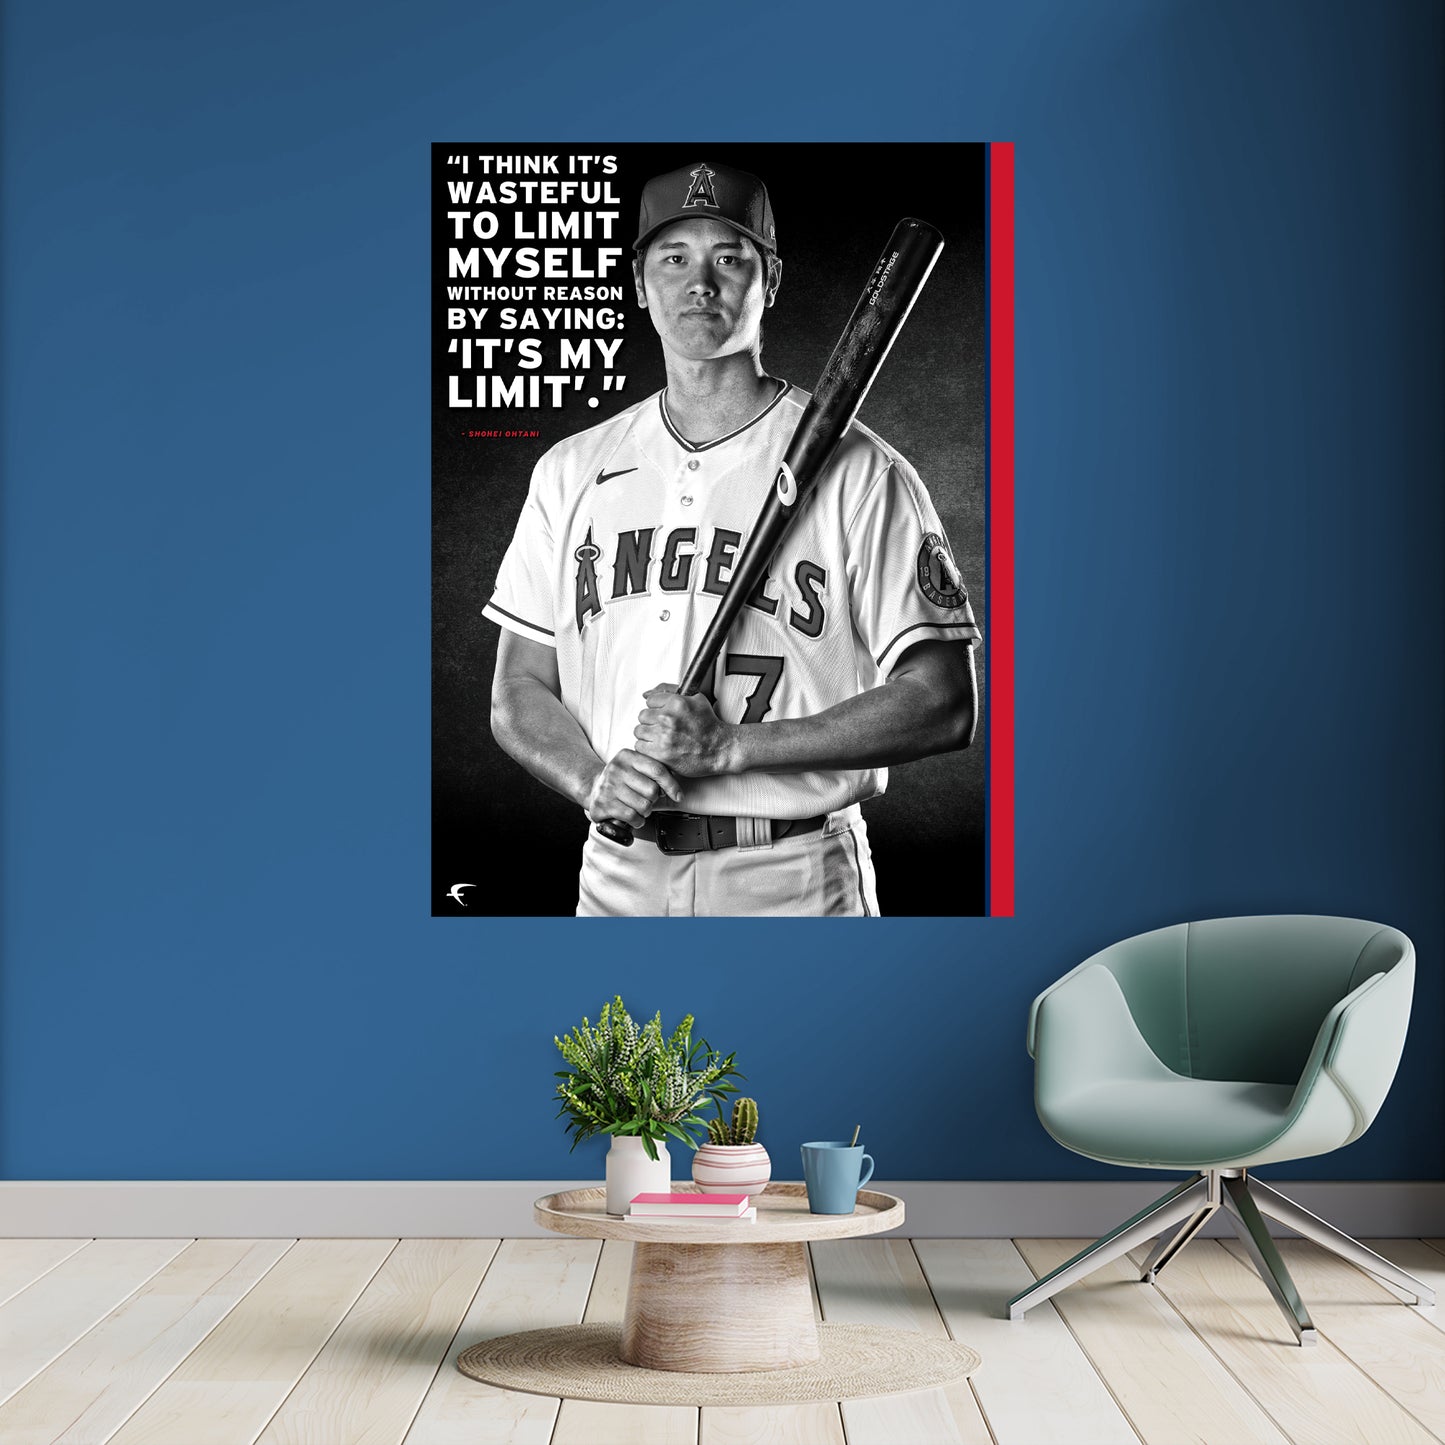 Los Angeles Angels: Shohei Ohtani Inspirational Poster - Officially Licensed MLB Removable Adhesive Decal